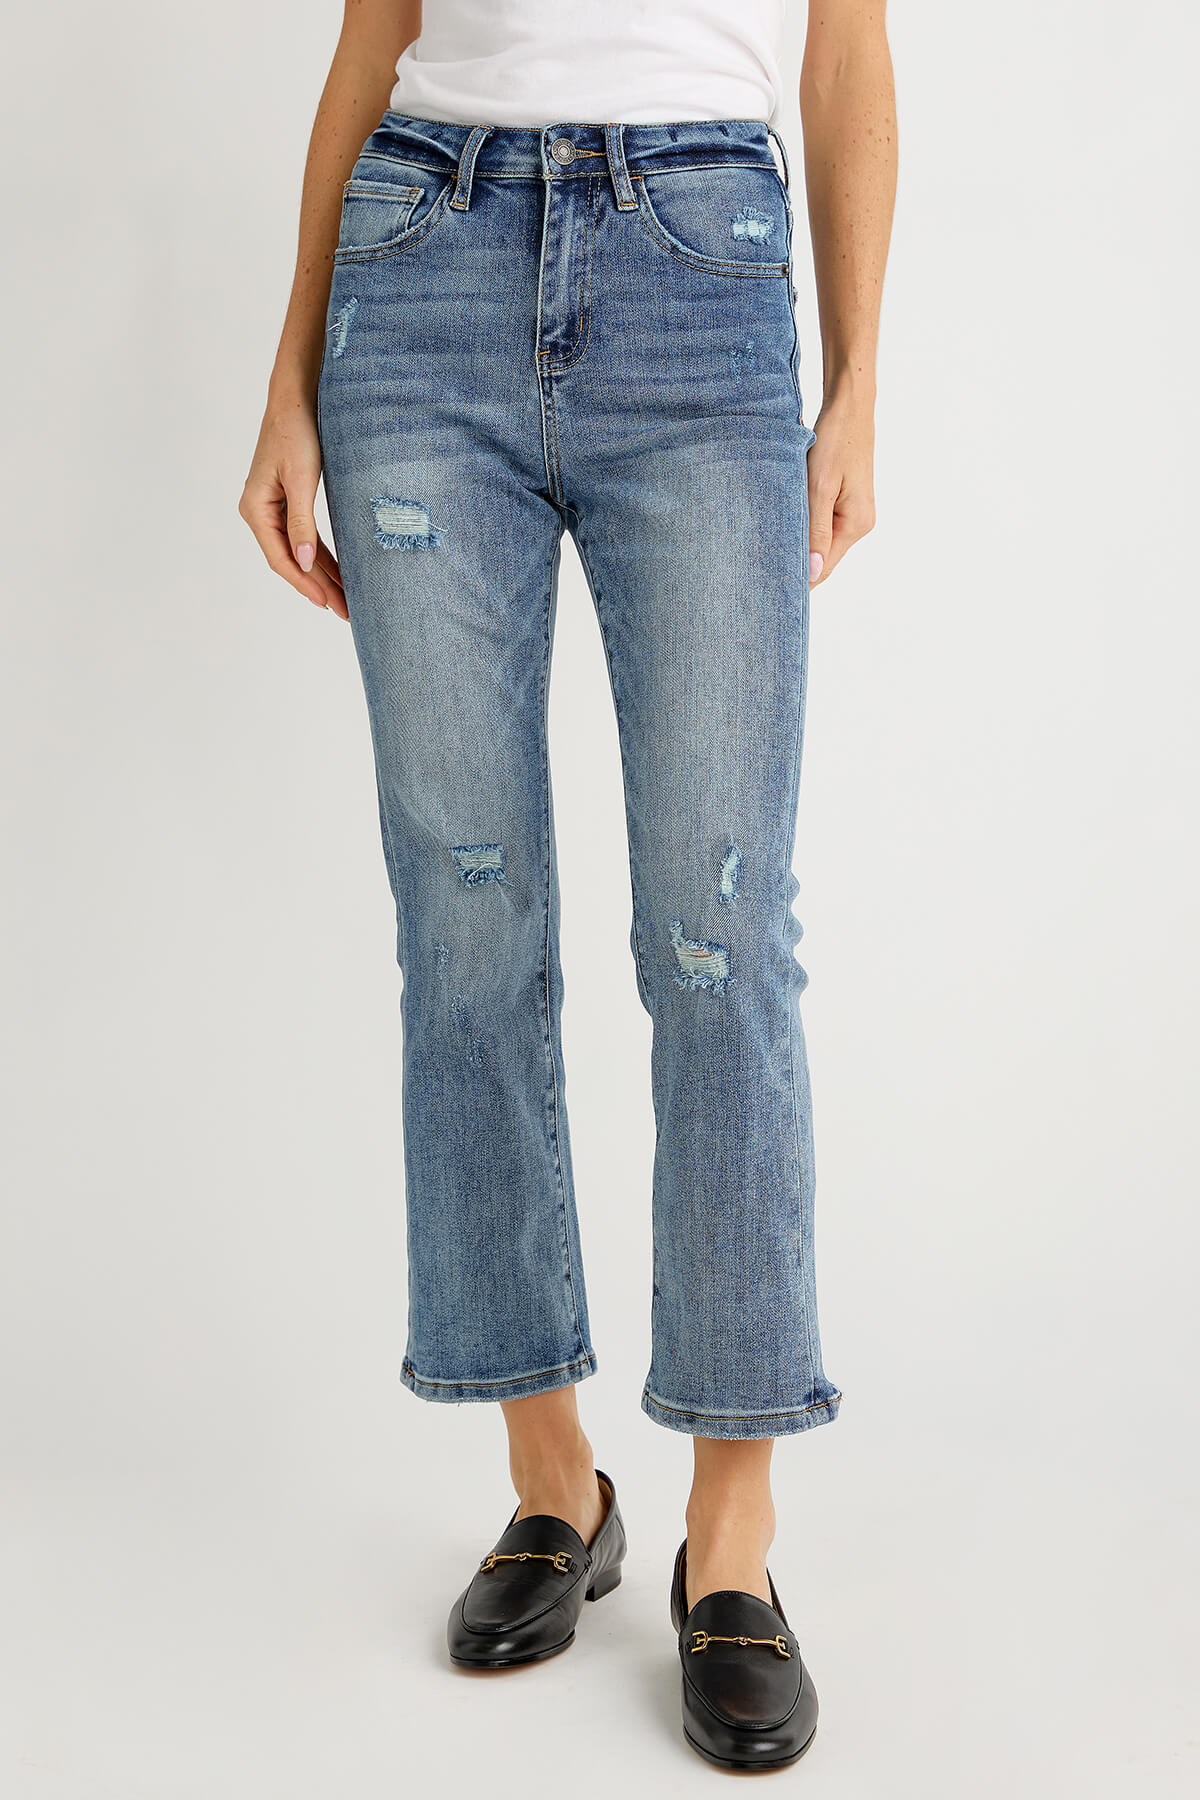 Women's High-rise 90's Vintage Straight Jeans - Universal Thread